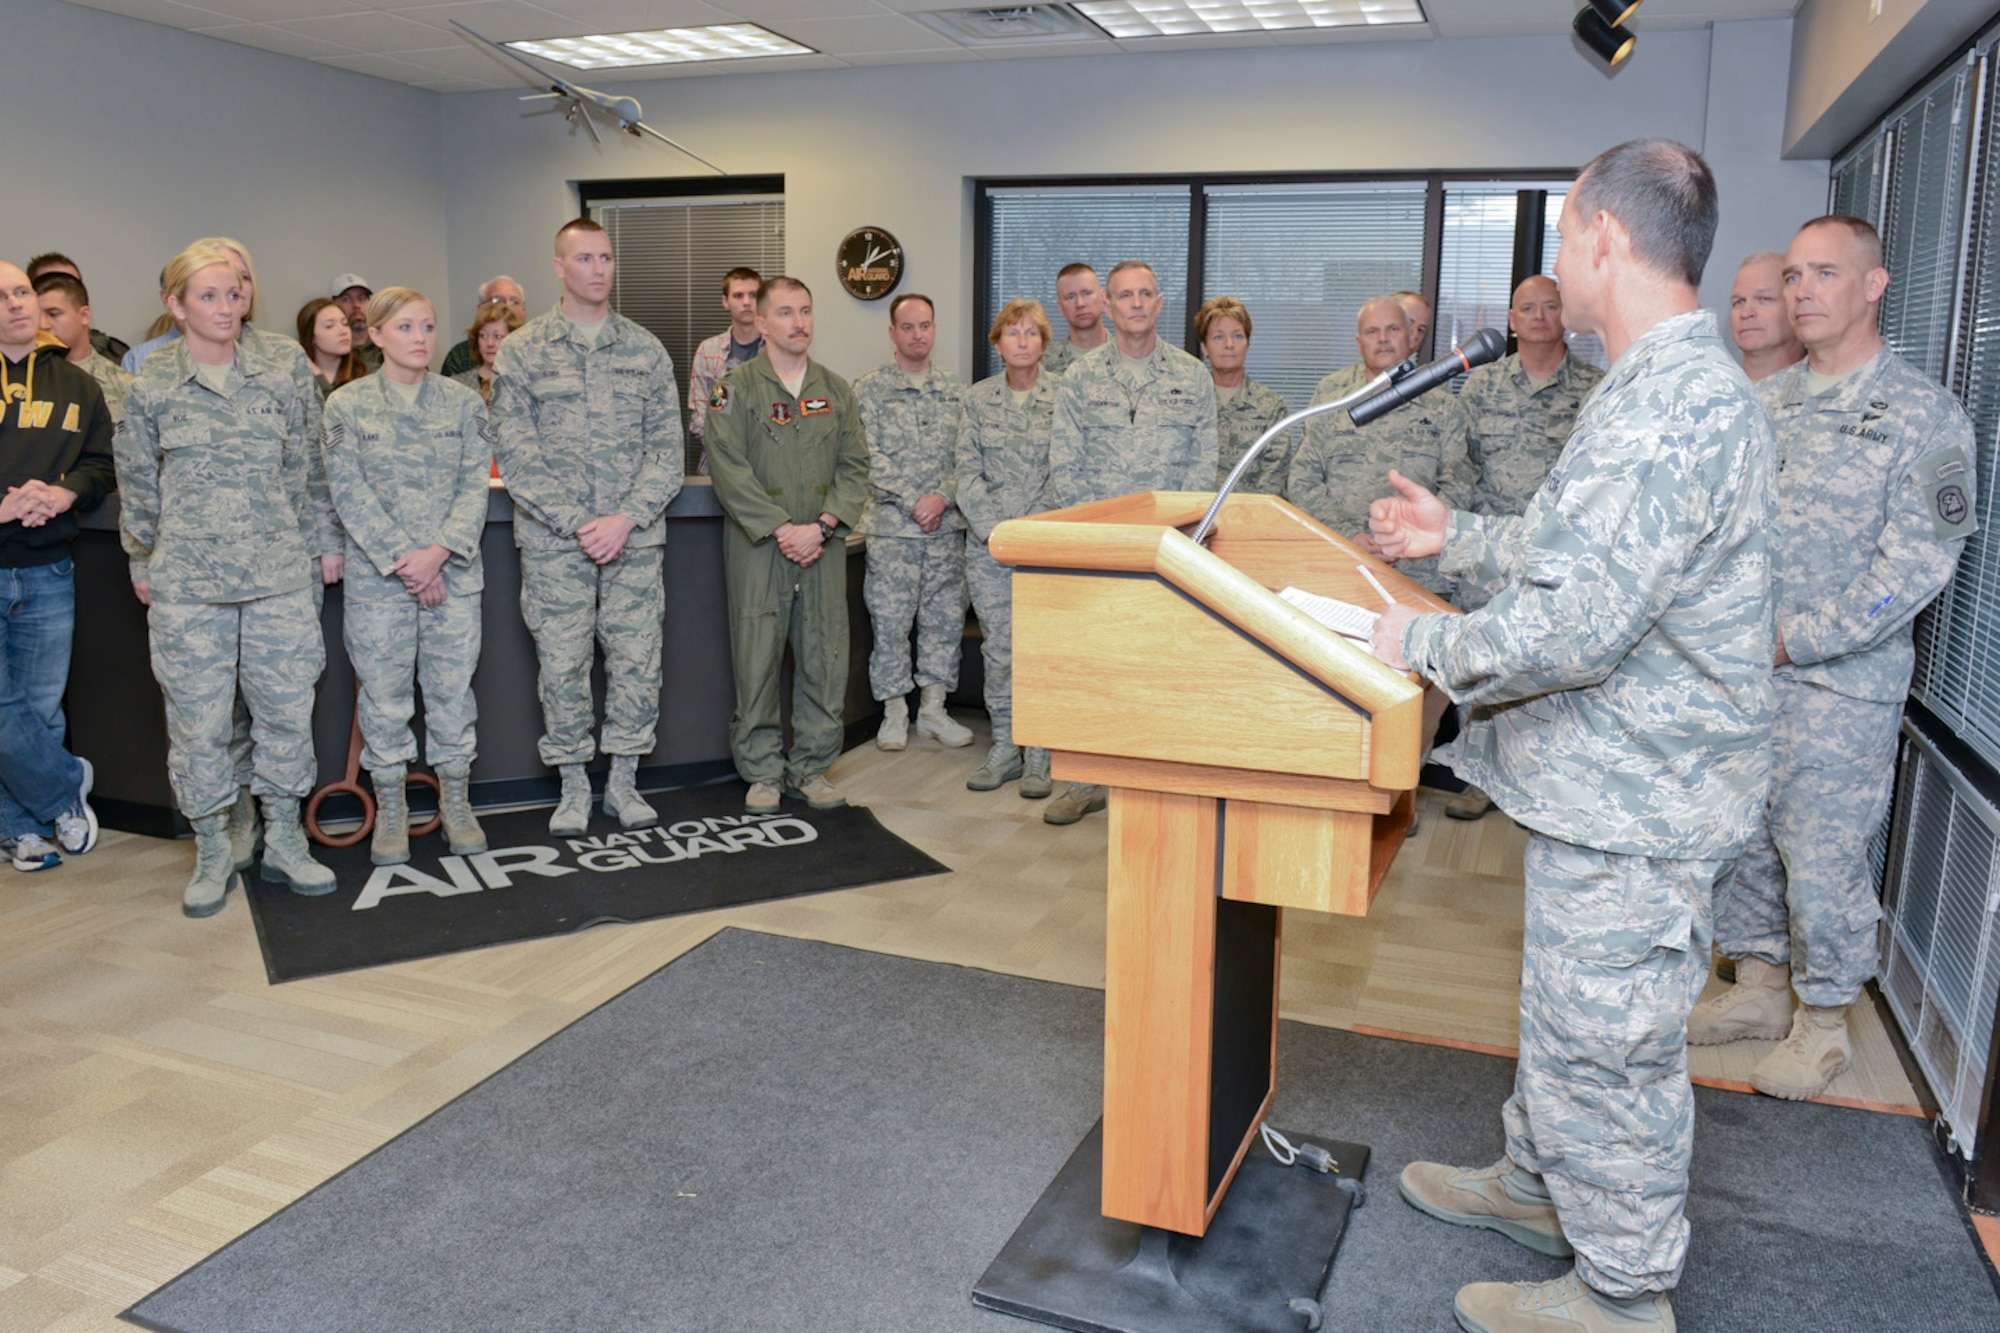 132d Wing (132WG) Commander, Col. Kevin Heer (podium), speaks to members of the Iowa Air and Army National Guard as they celebrate the opening of the 132WG, Des Moines, Iowa off-site Recruiting Operation Center during a ribbon cutting ceremony held at the new Recruiting Operation Center in West Des Moines, Iowa on Tuesday, March 24, 2015.  (U.S. Air National Guard photo by Staff Sgt. Linda K. Burger/Released)